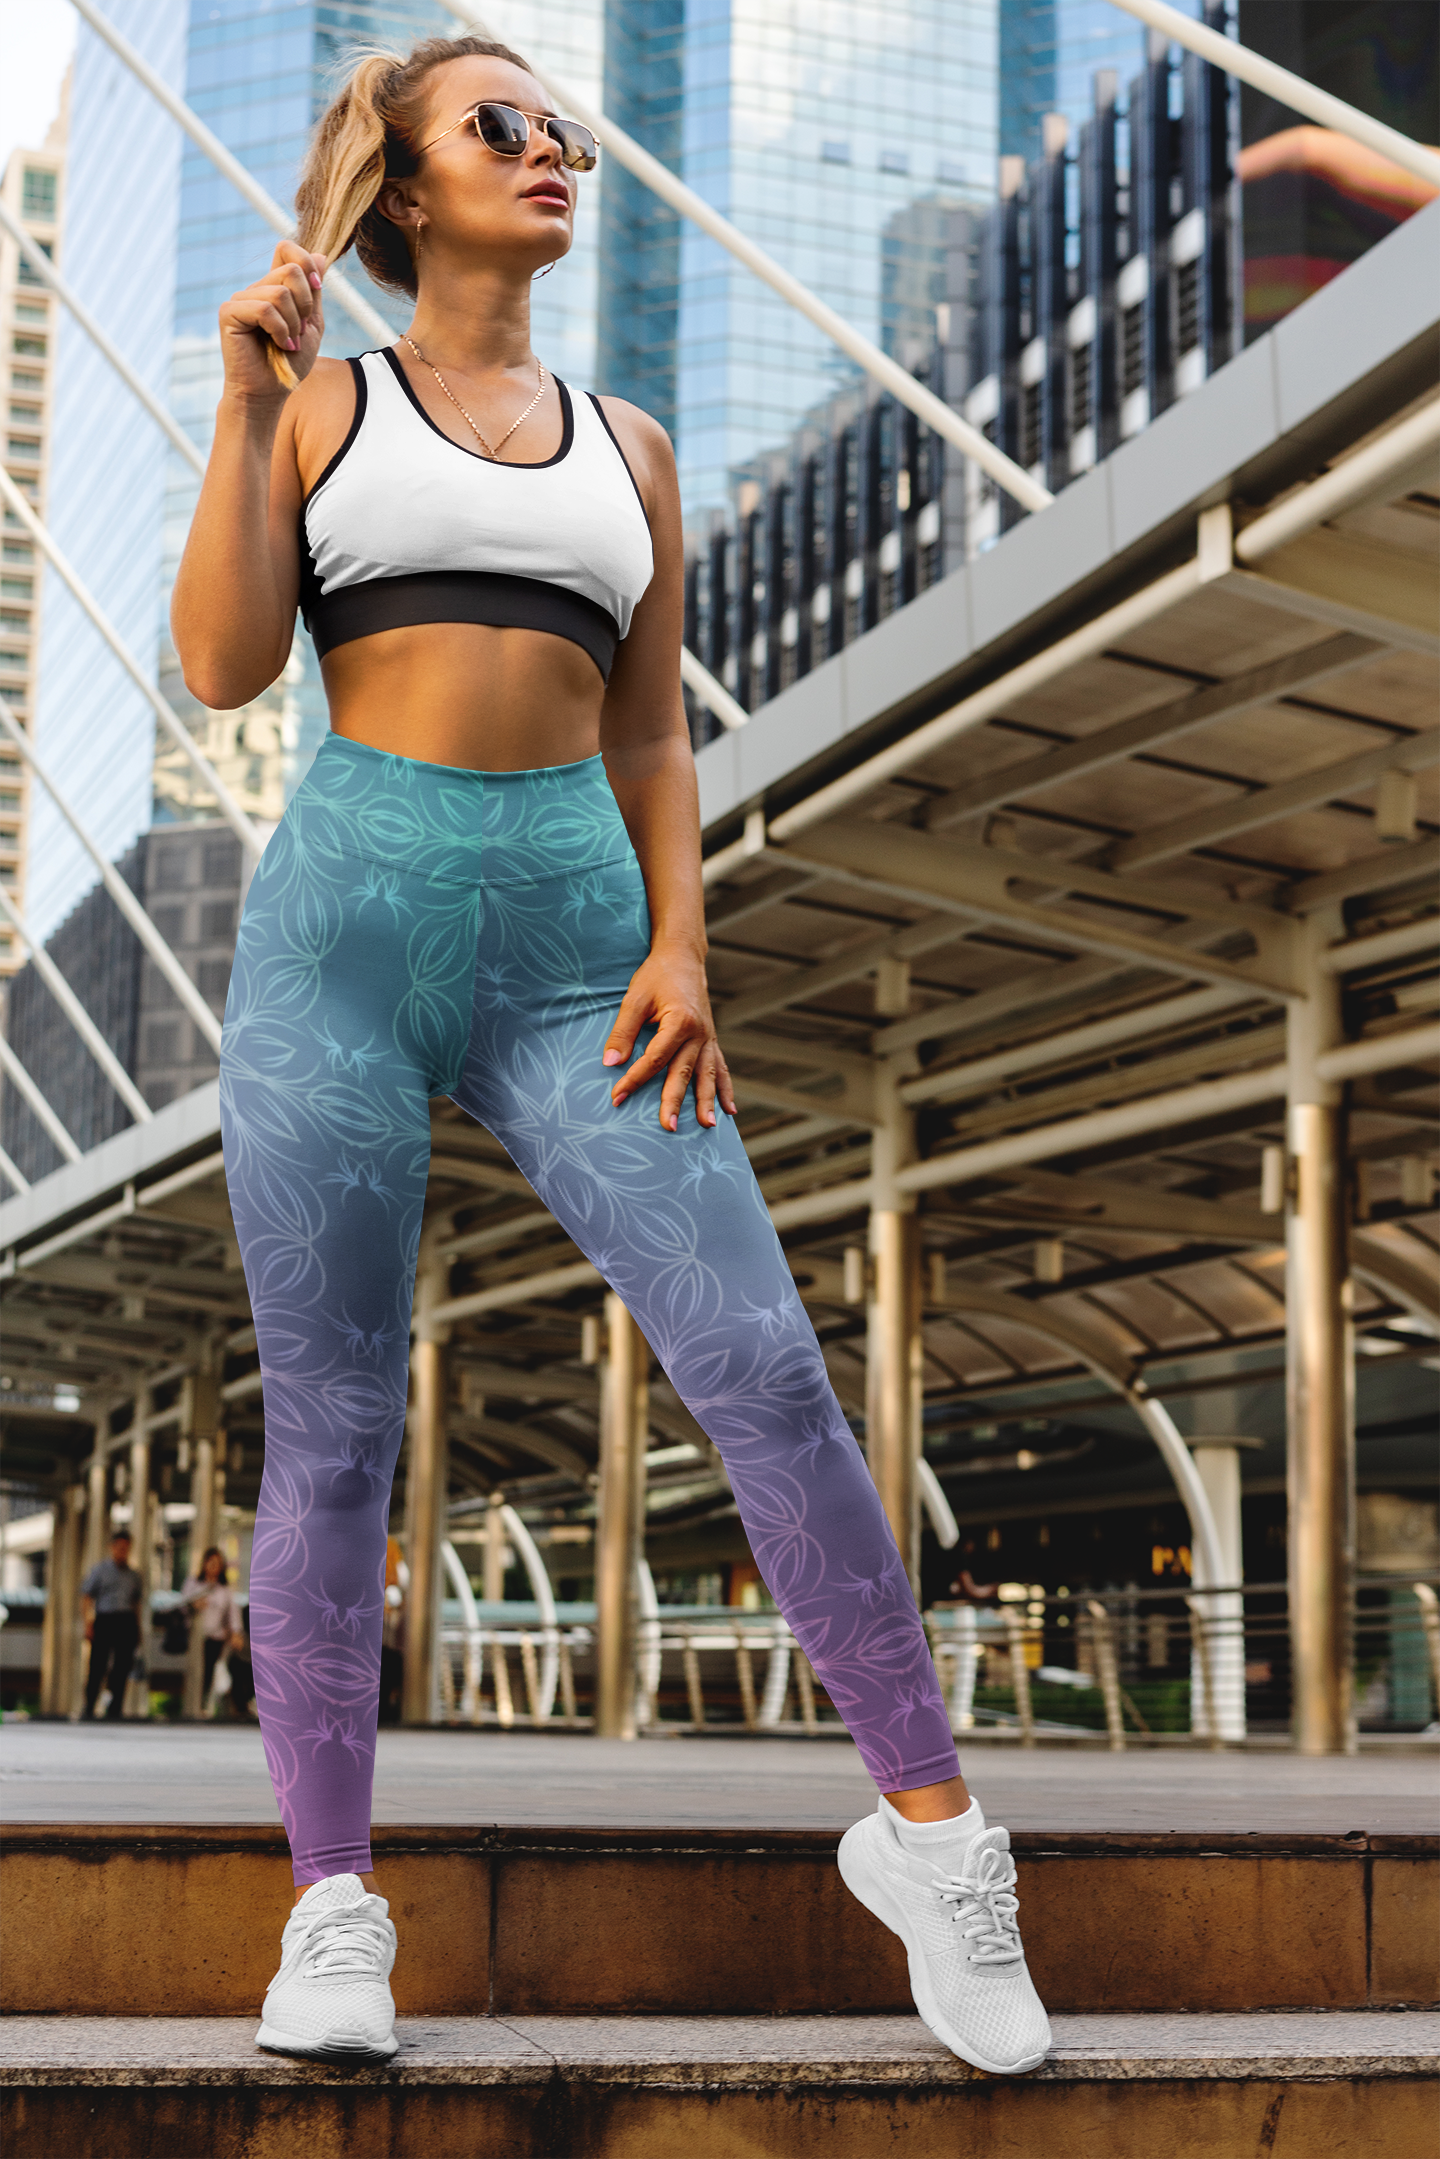 Printed Yoga Pants For Women Gym High Waist With Pockets Abdominal